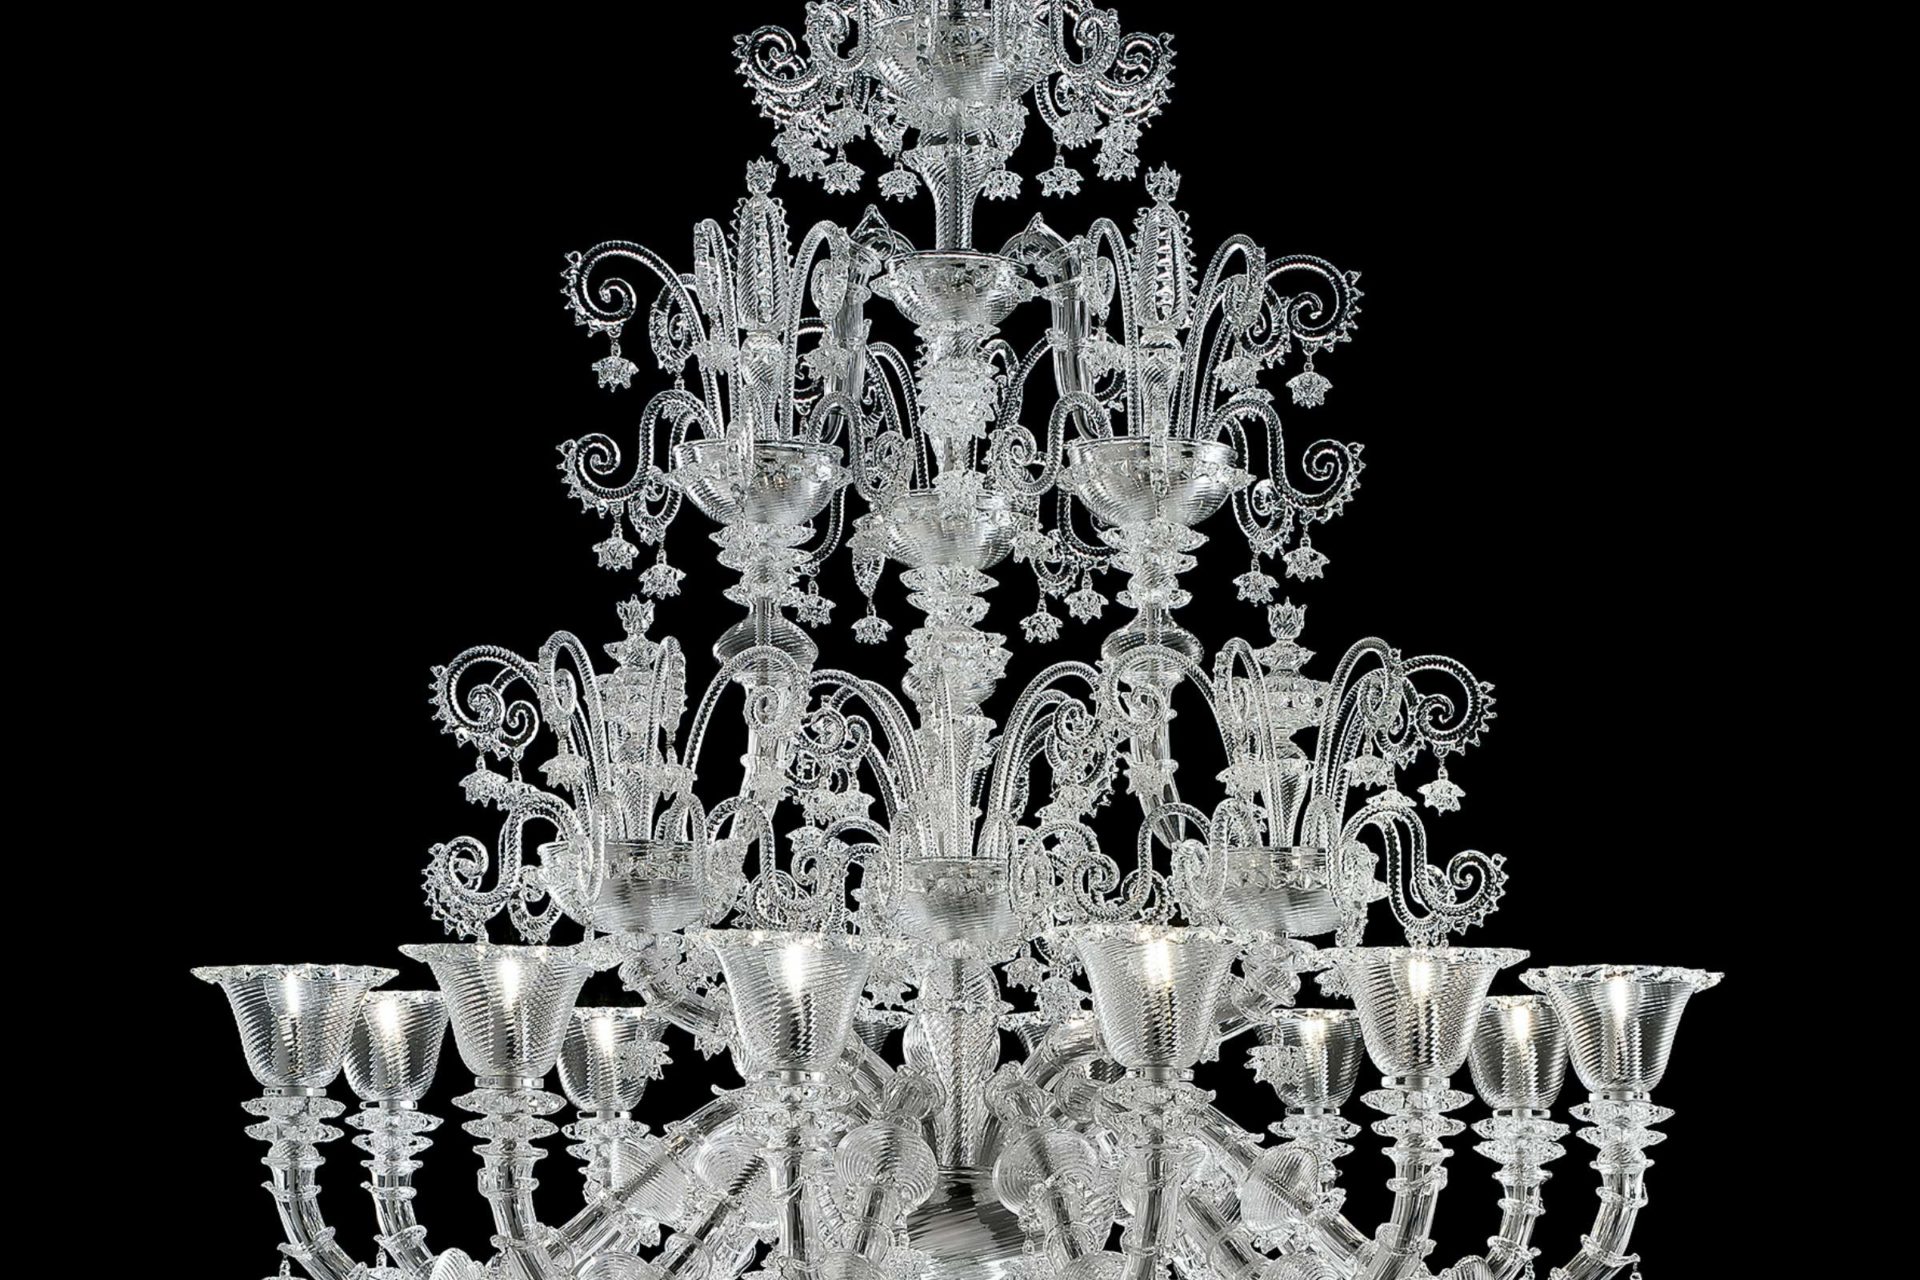 The Venetian glass objects of Barovier & Toso